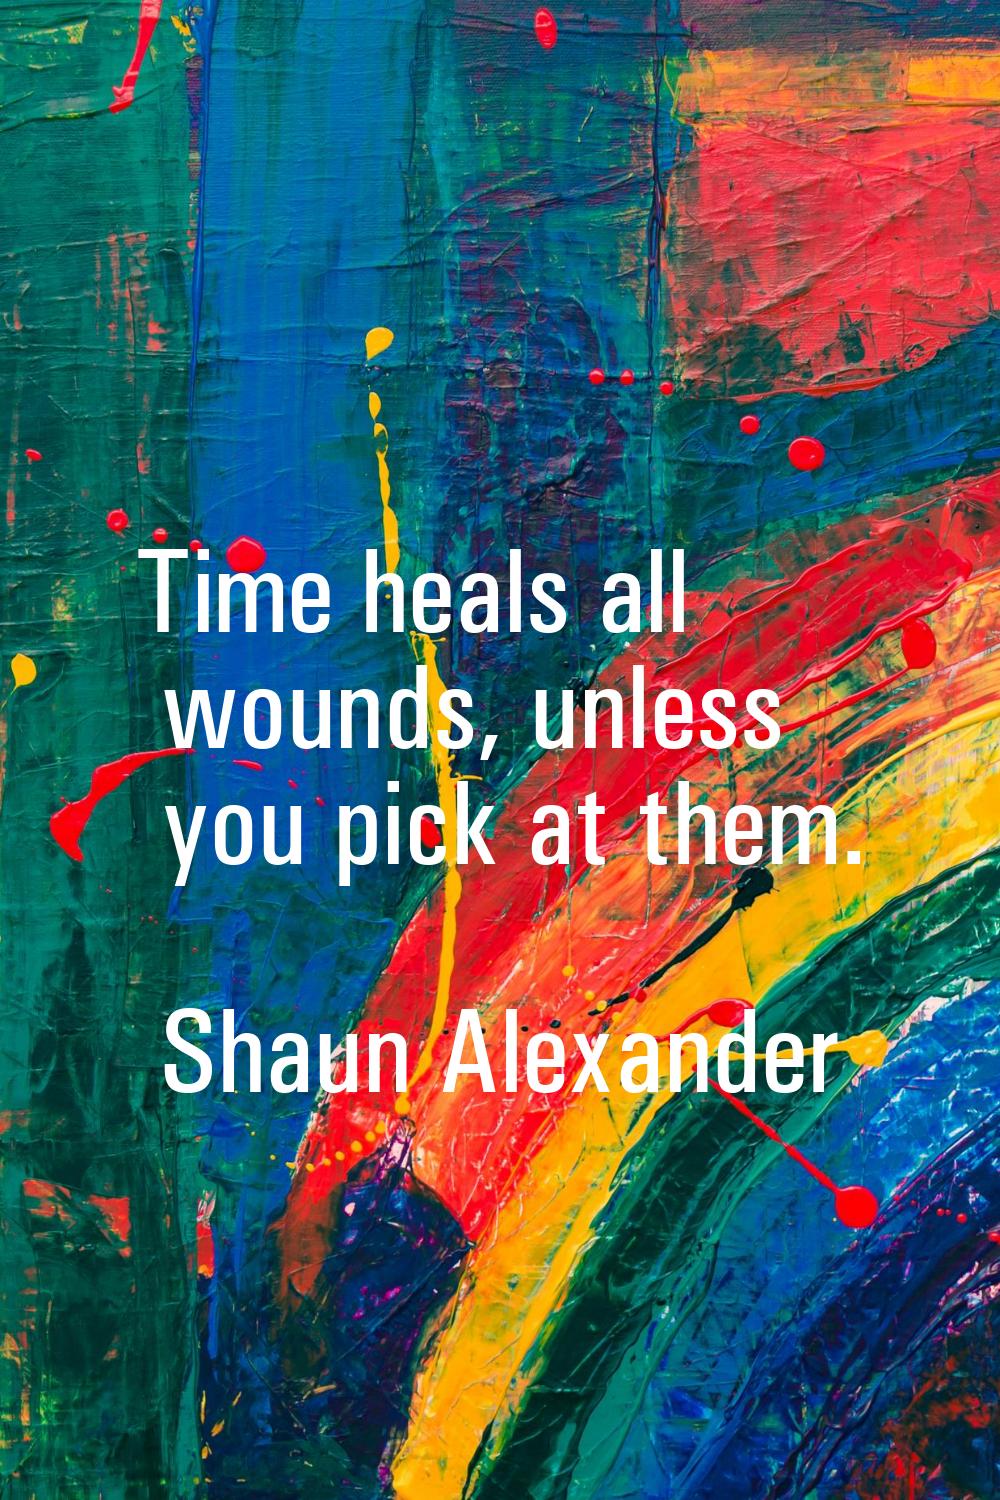 Time heals all wounds, unless you pick at them.